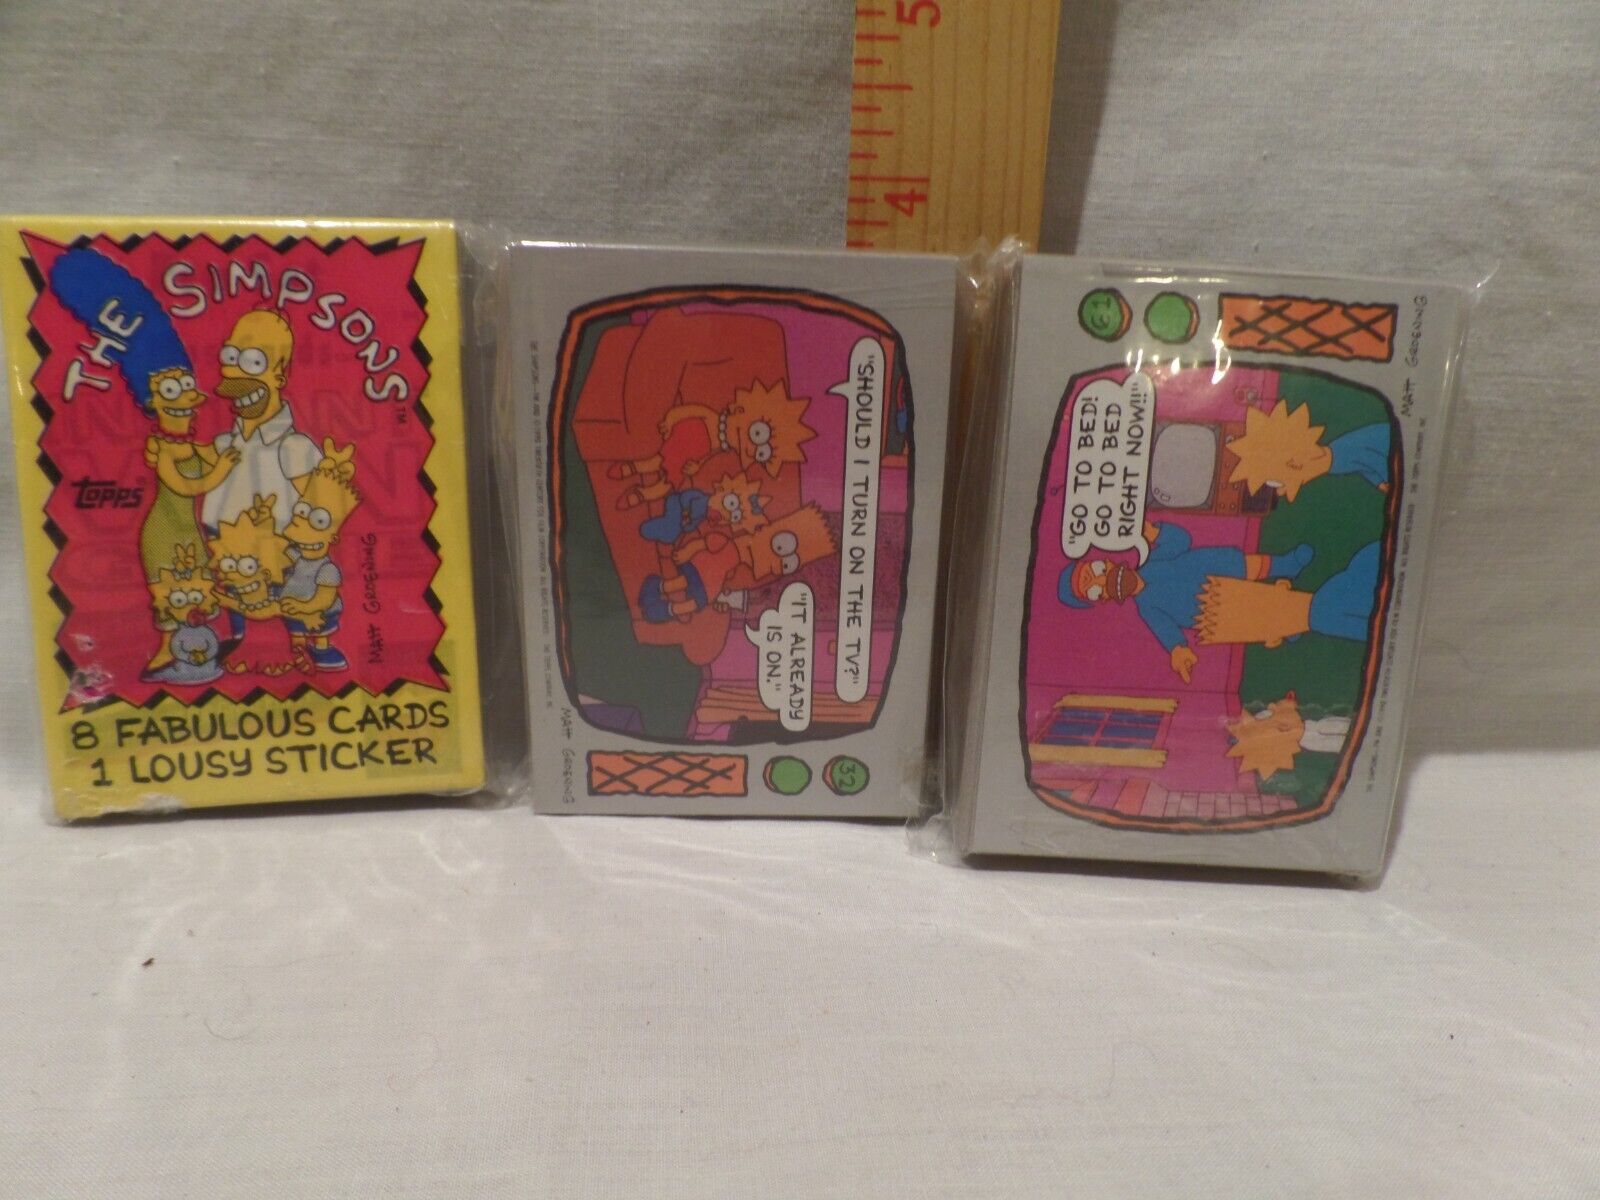 1990 TOPPS THE SIMPSONS TRADING CARD SET COMPLETE 88 CARDS NO STICKERS